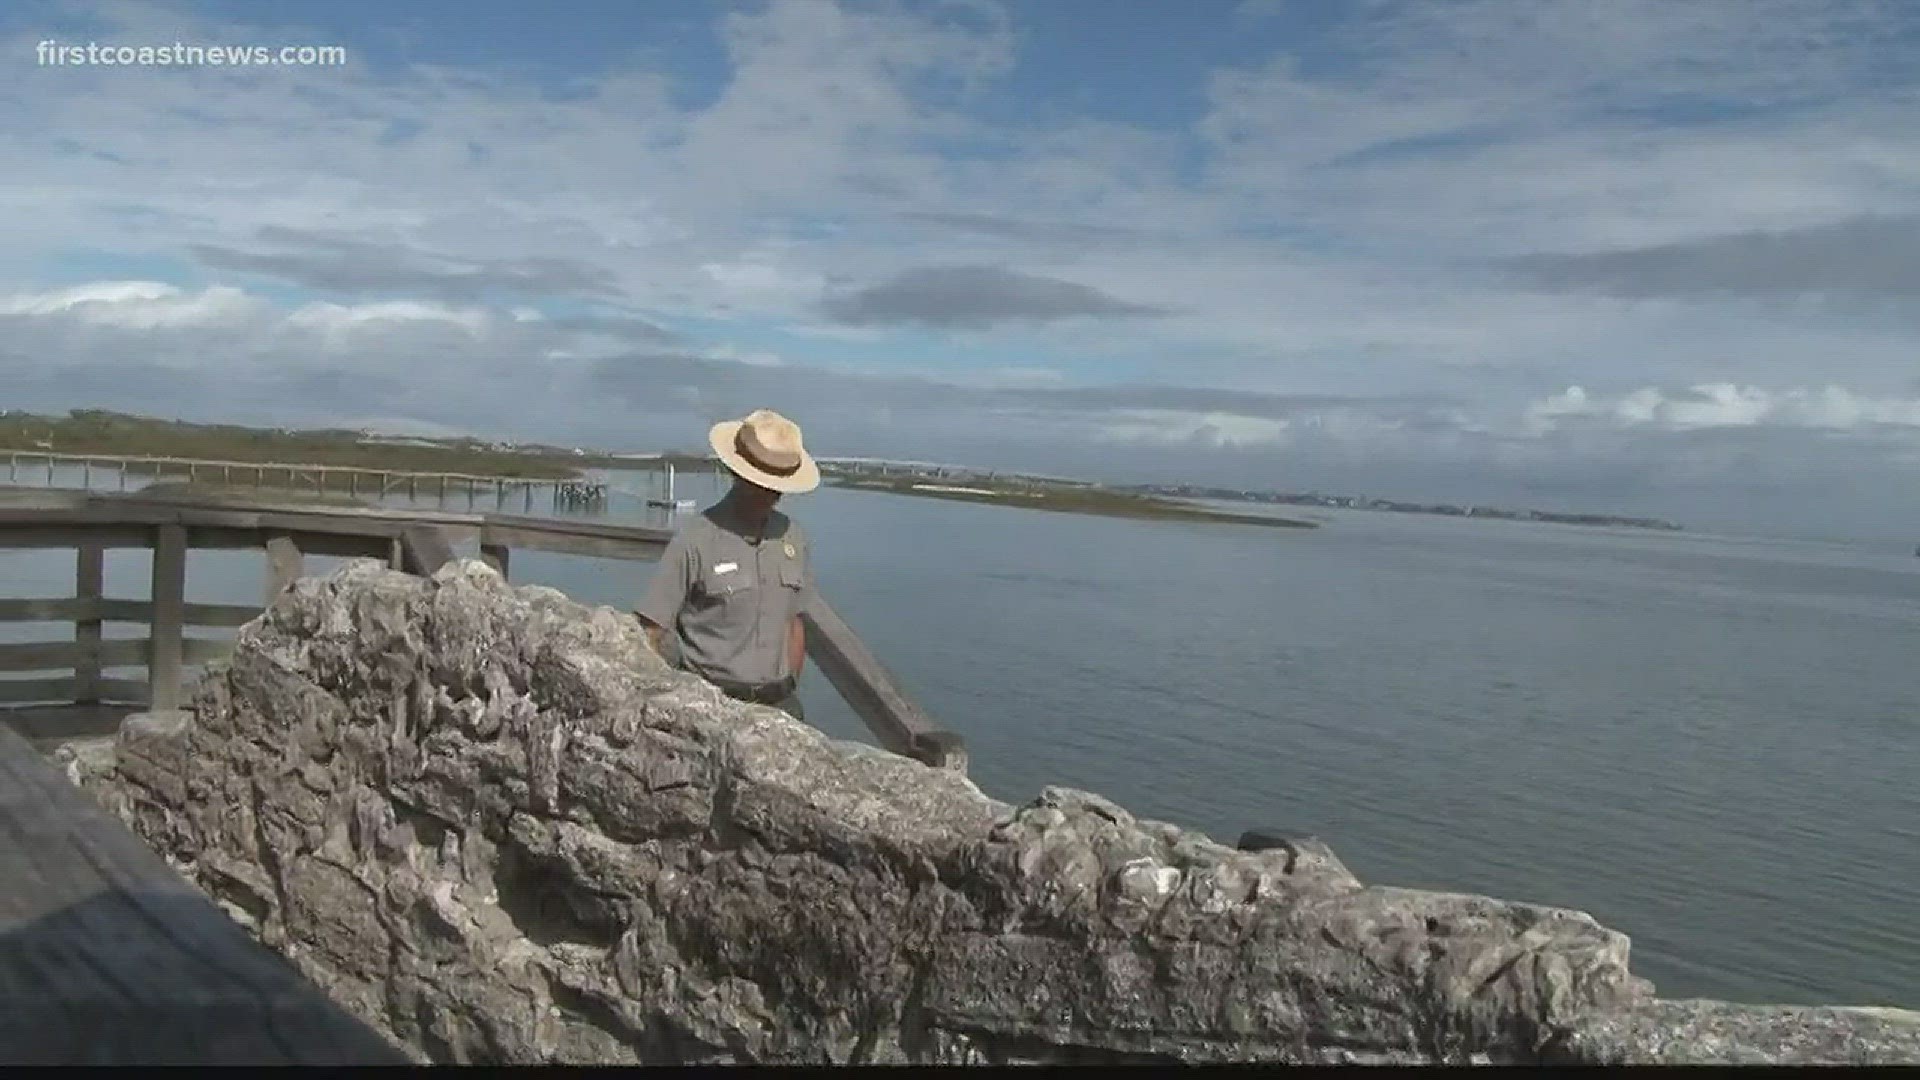 Castillo de San Marcos is the oldest National Park in the U.S. Park employees say it needs about $4 million to prevent eroding, among many other projects.